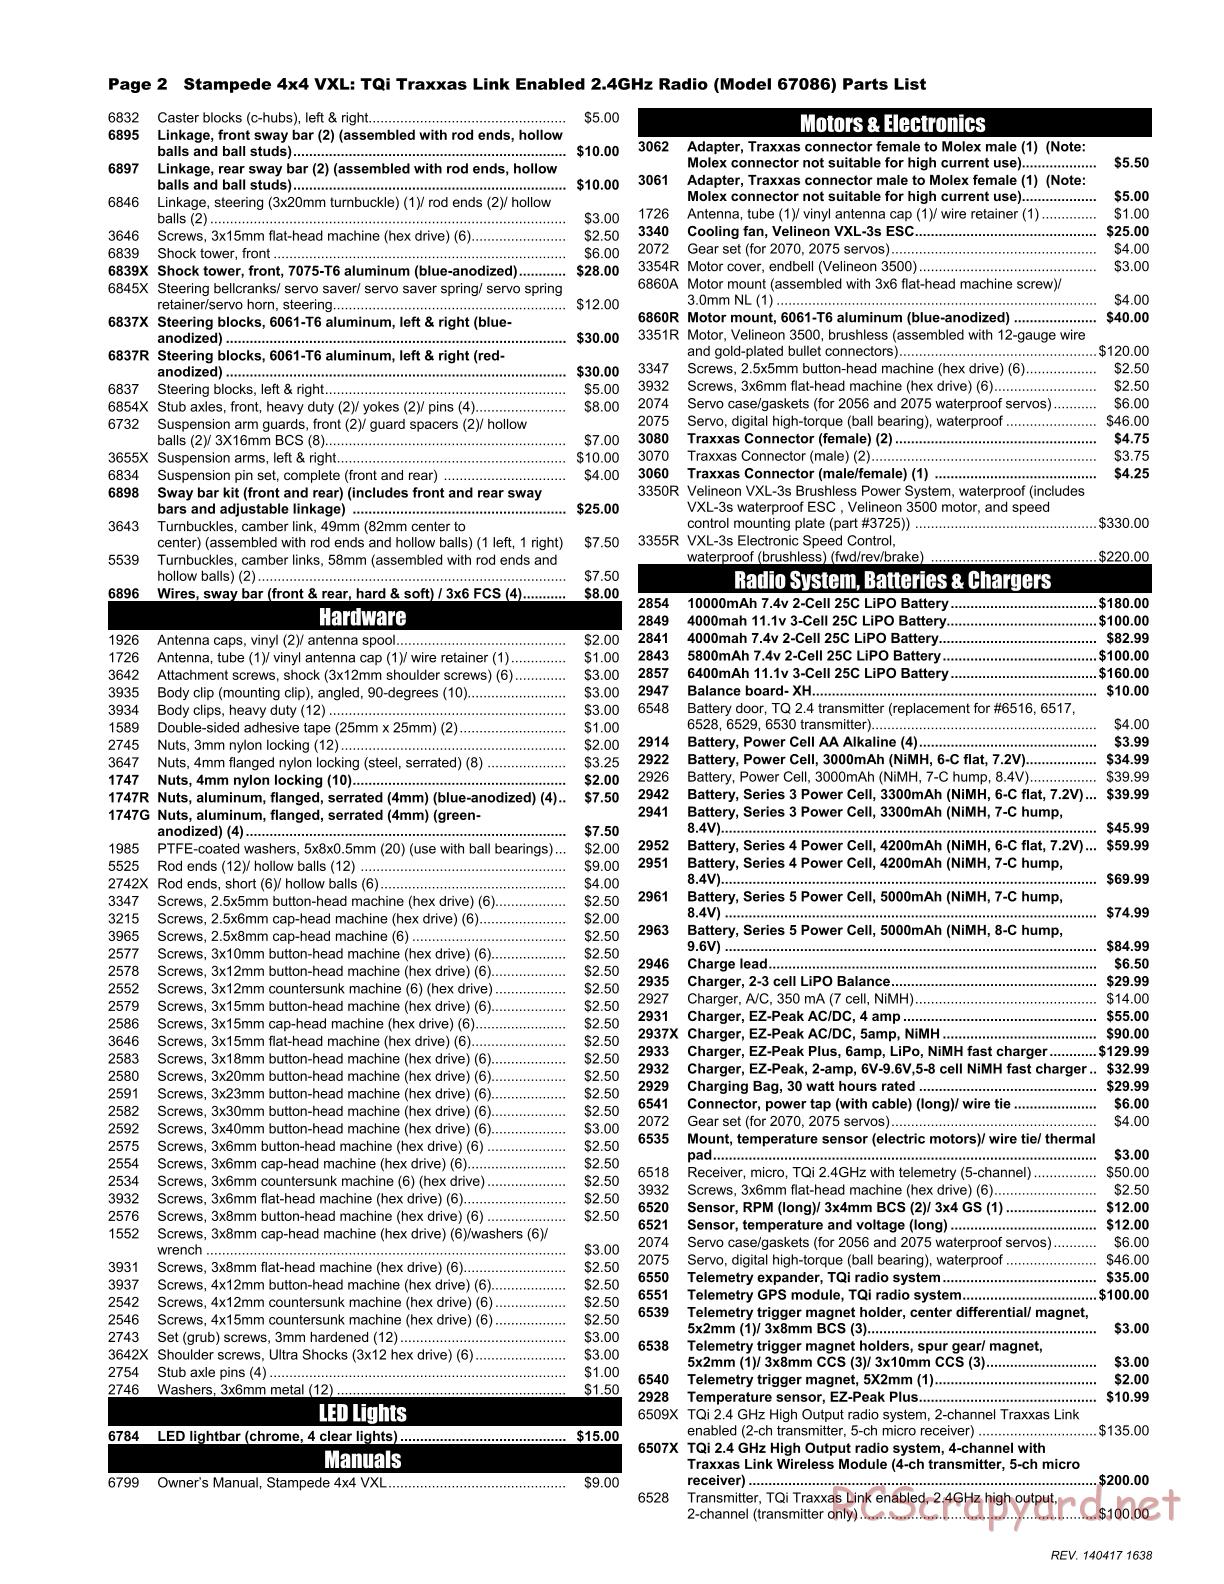 Traxxas - Stampede 4x4 VXL (2014) - Parts List - Page 2